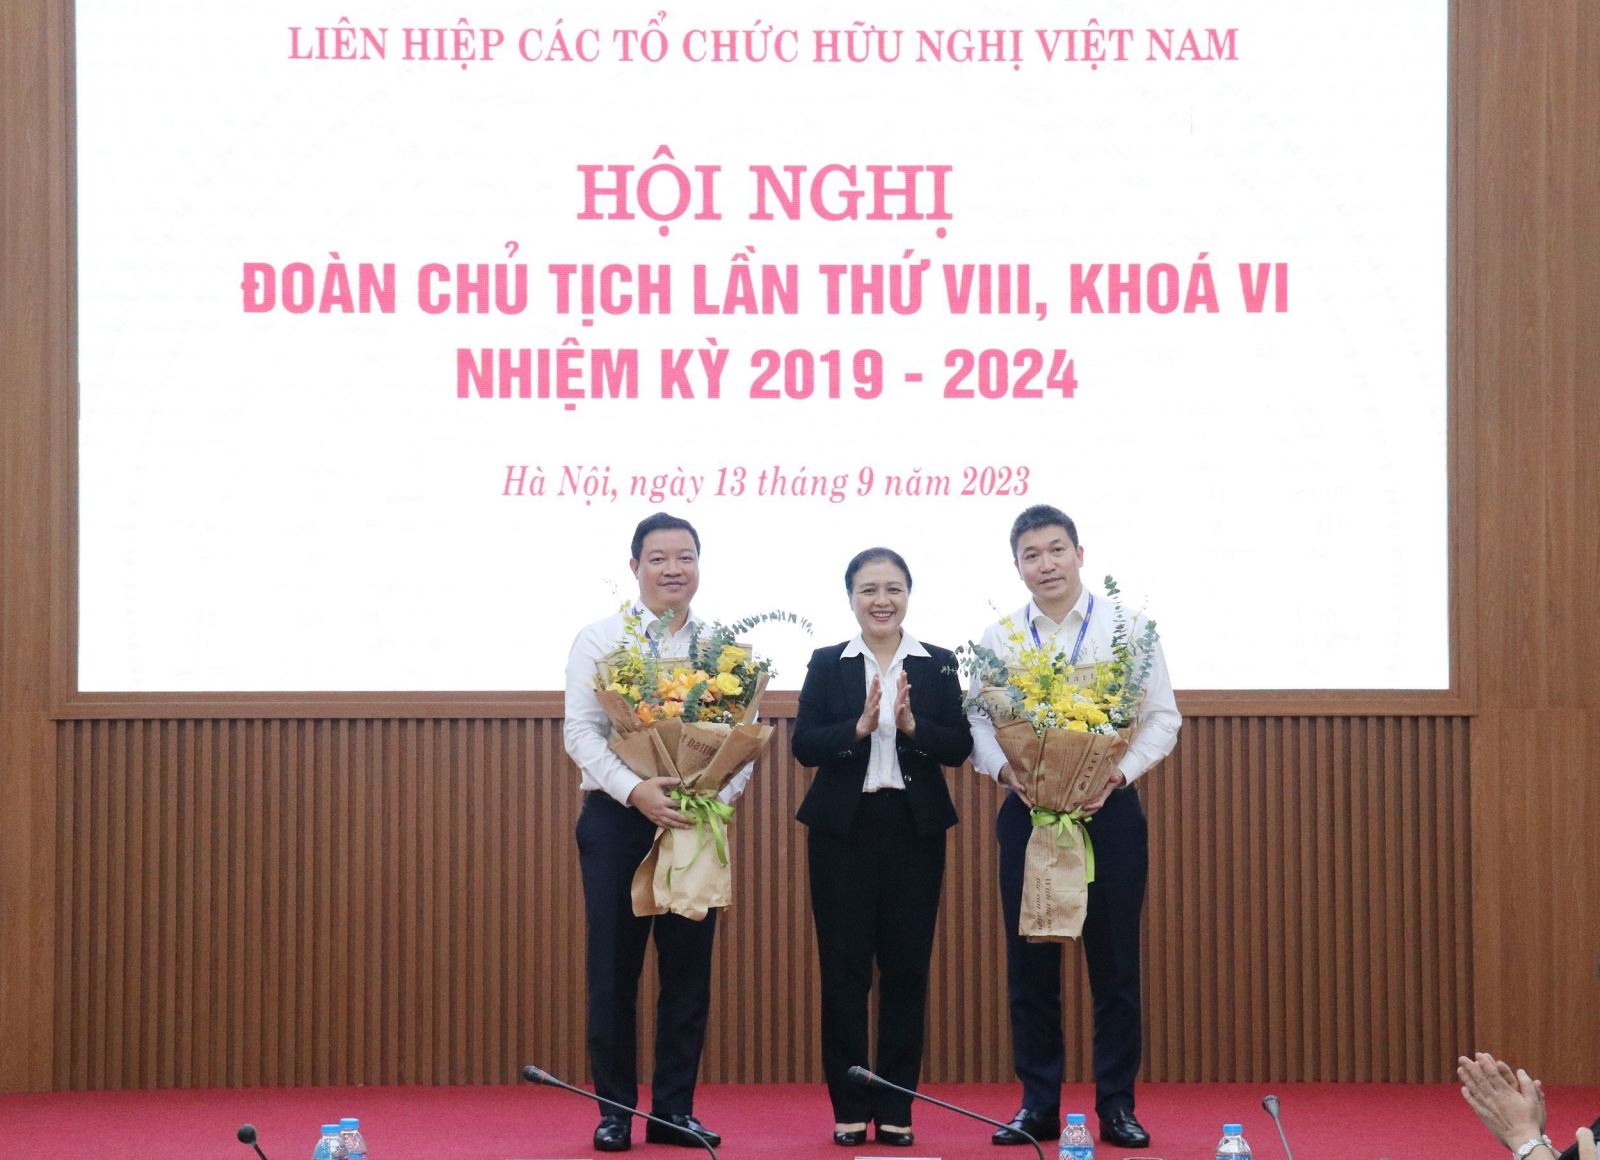 Phan Anh Son elected President of the Viet Nam Union of Friendship Organizations